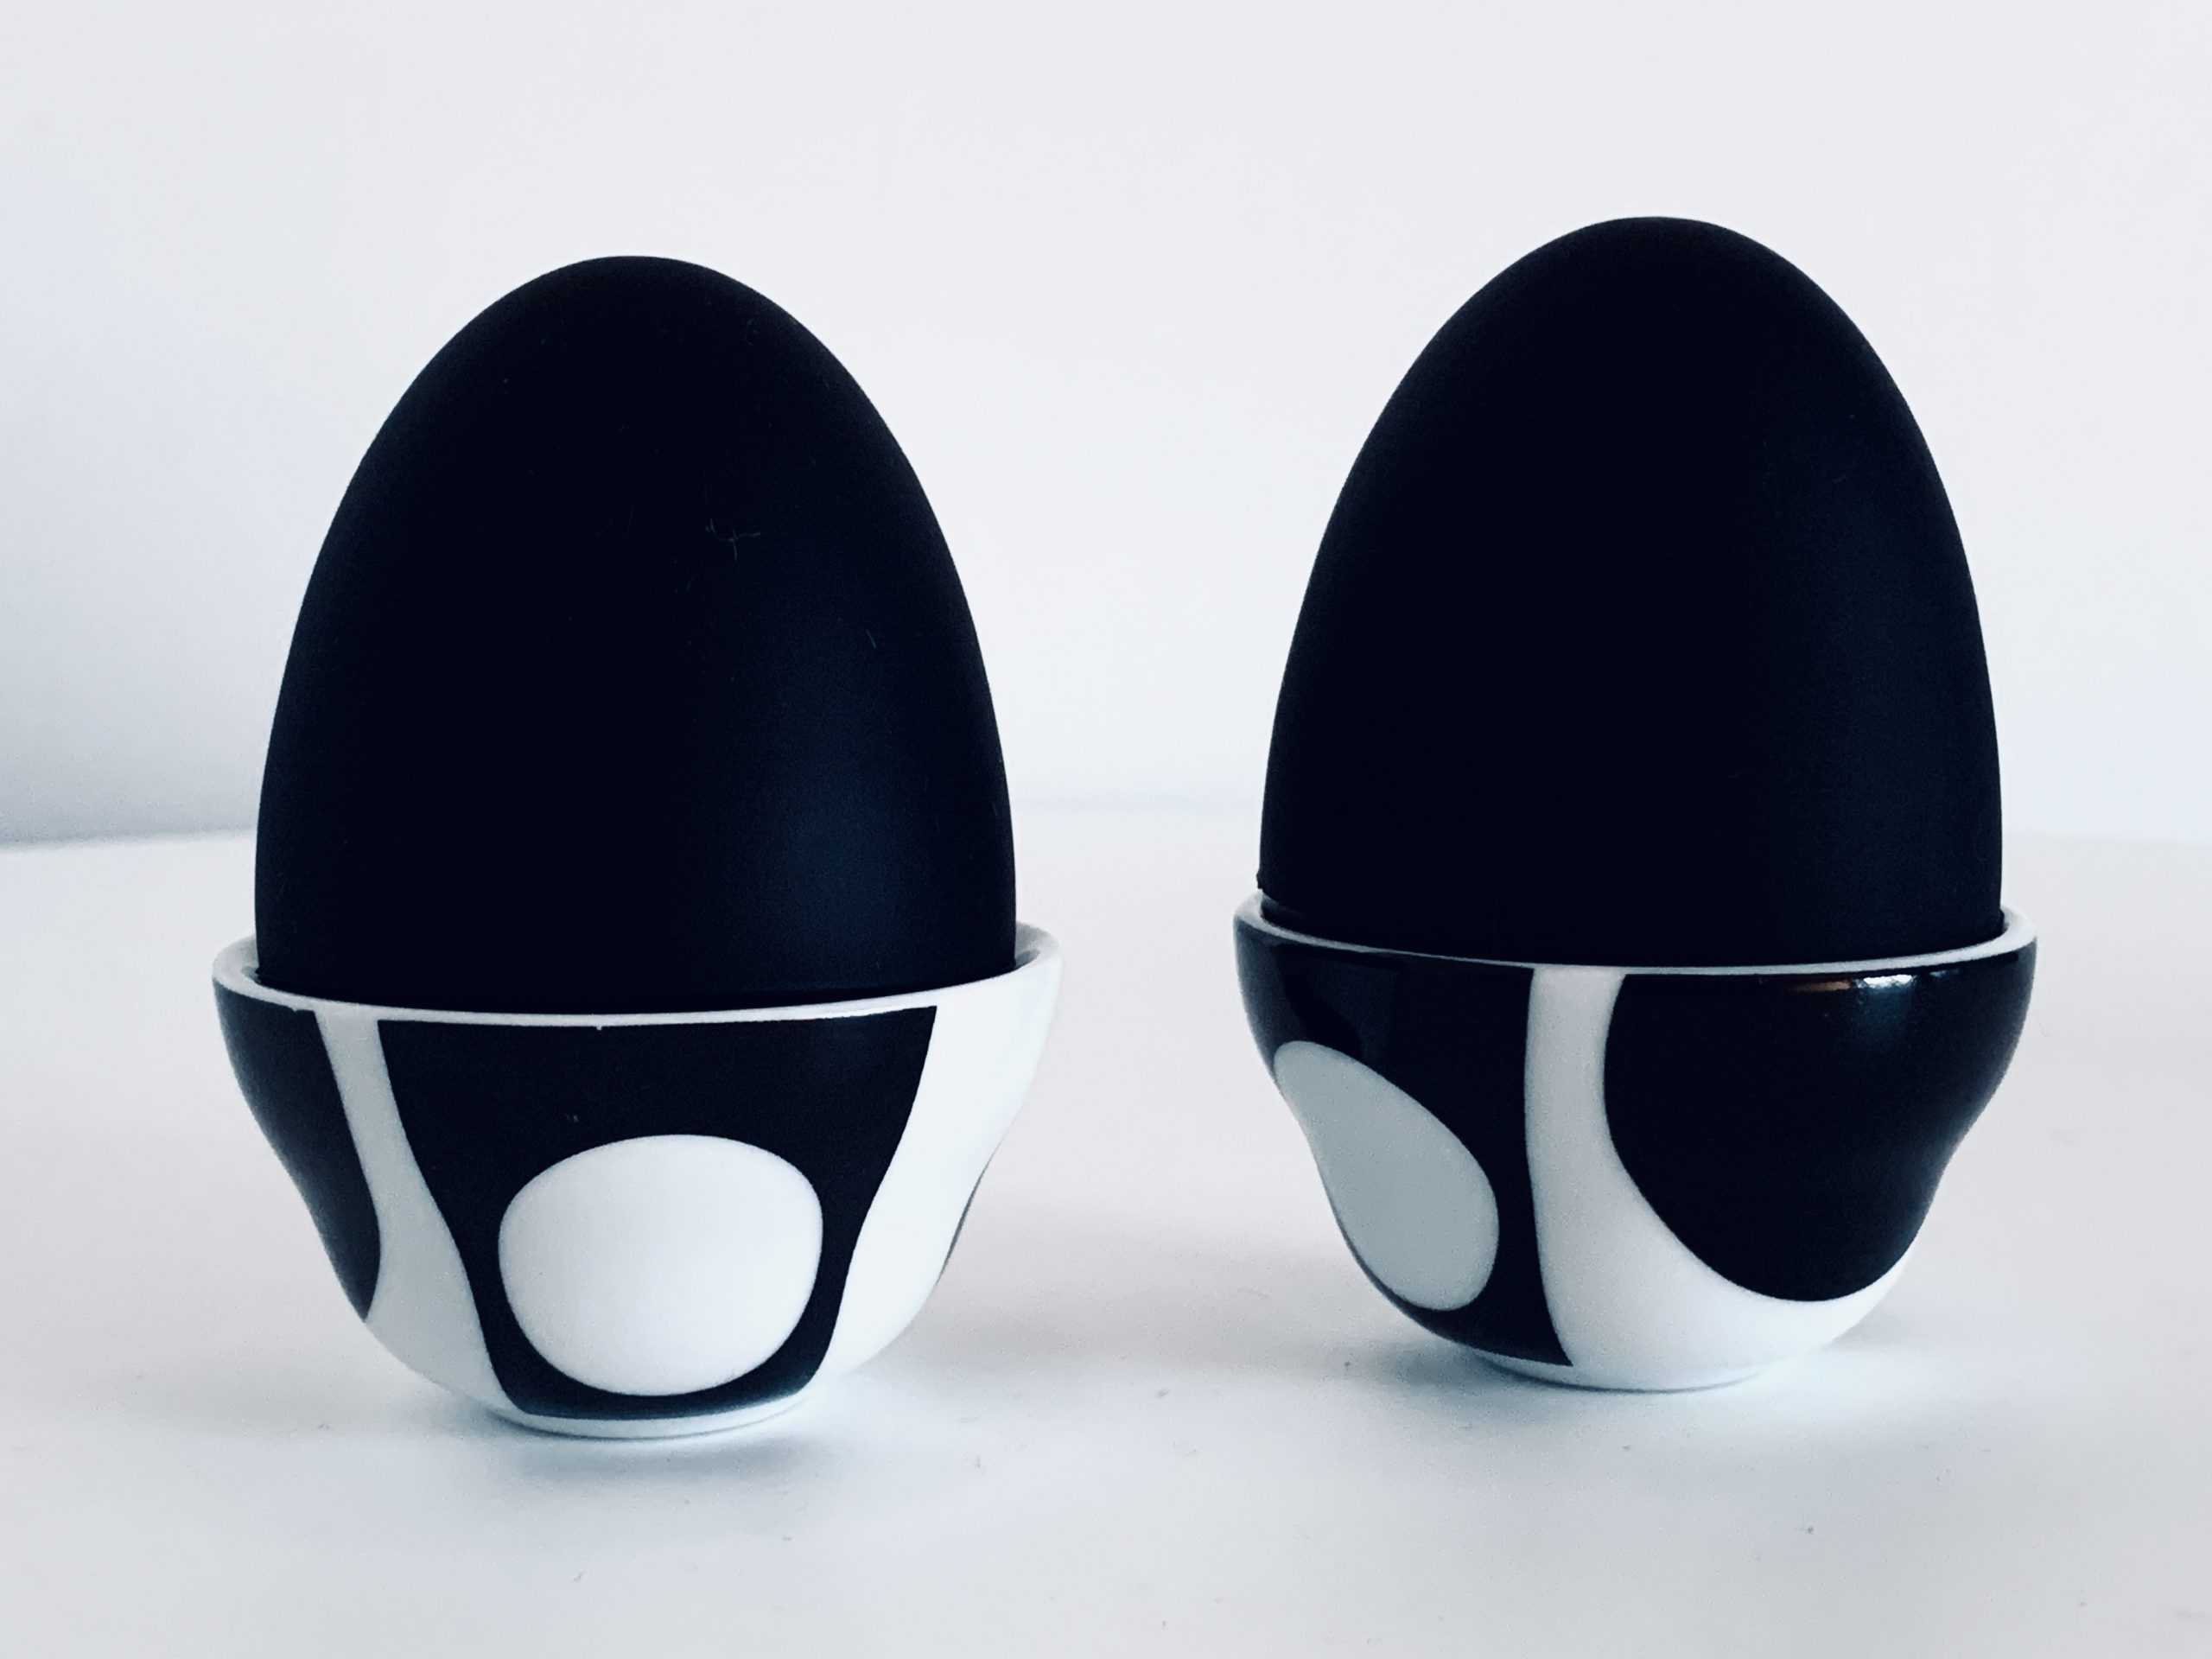 Image of the Verner Panton Menu egg cups featured in this ad.